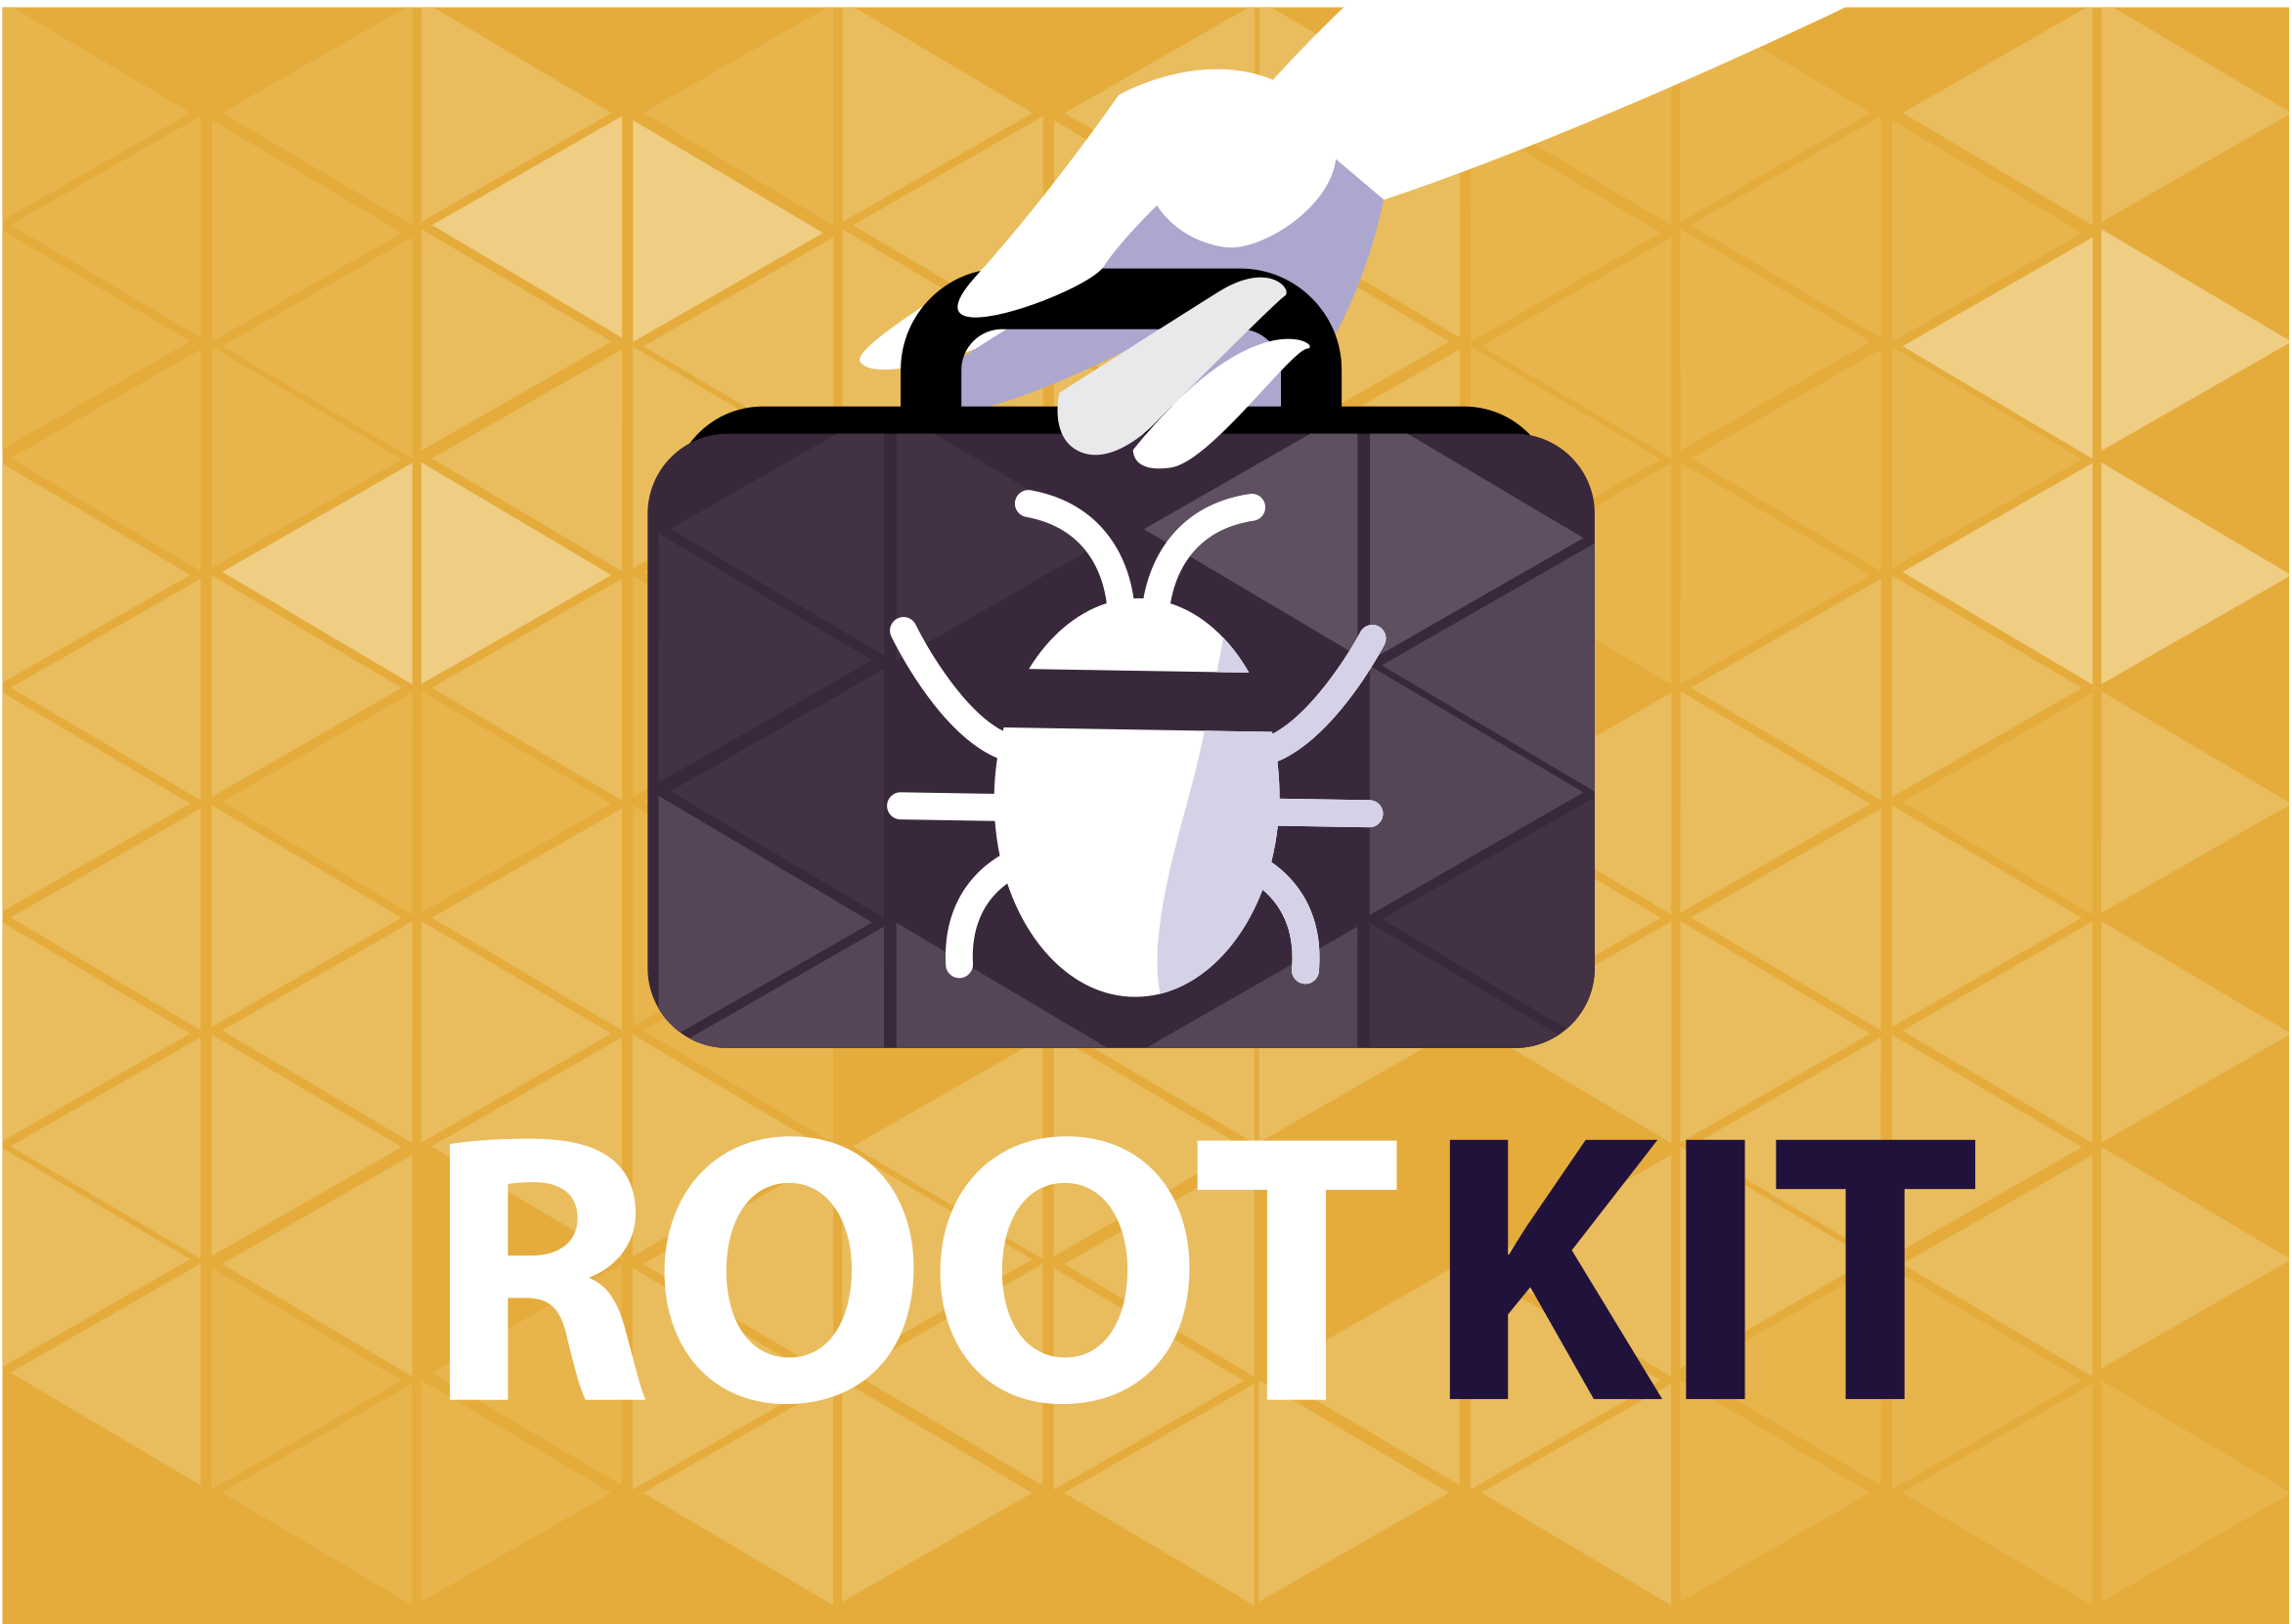 What is a rootkit?